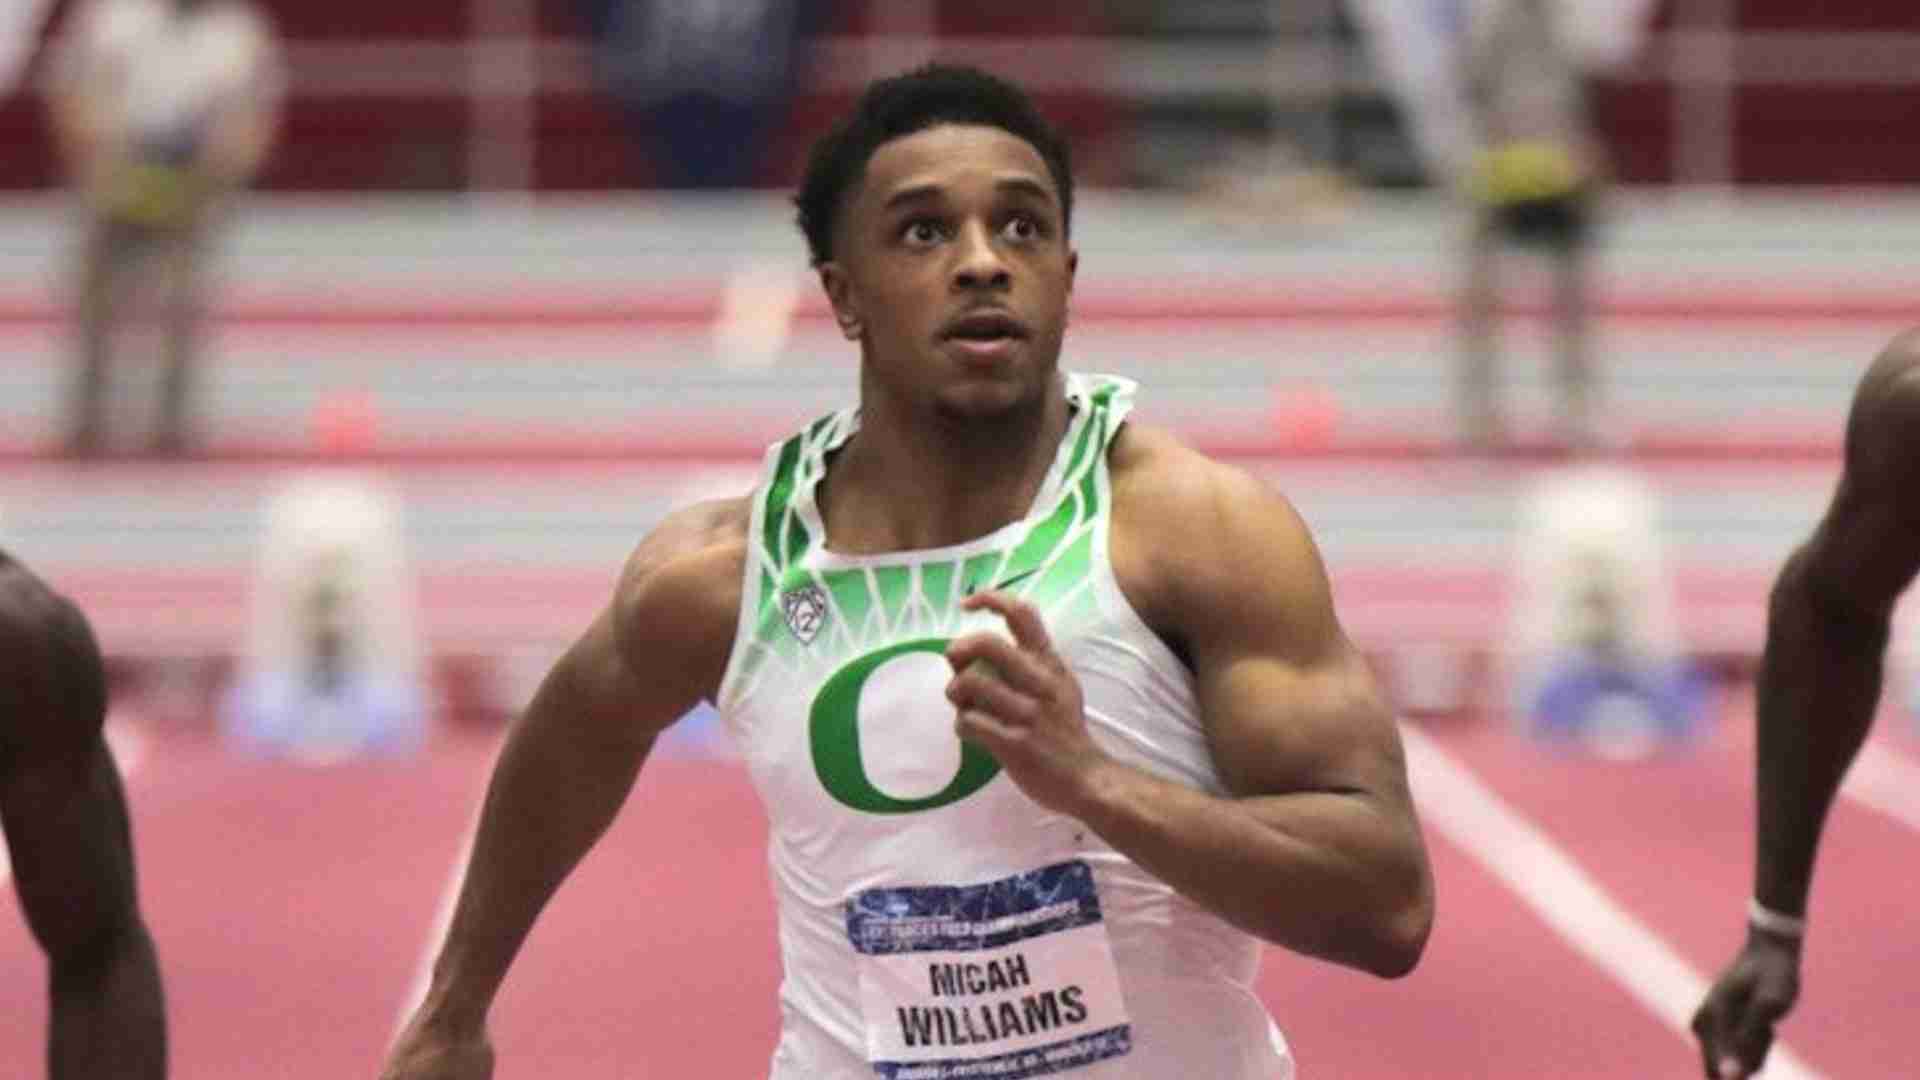 Watch Matthew Boling vs Micah Williams vs Favour Ashe in 60m at Texas Tech Open